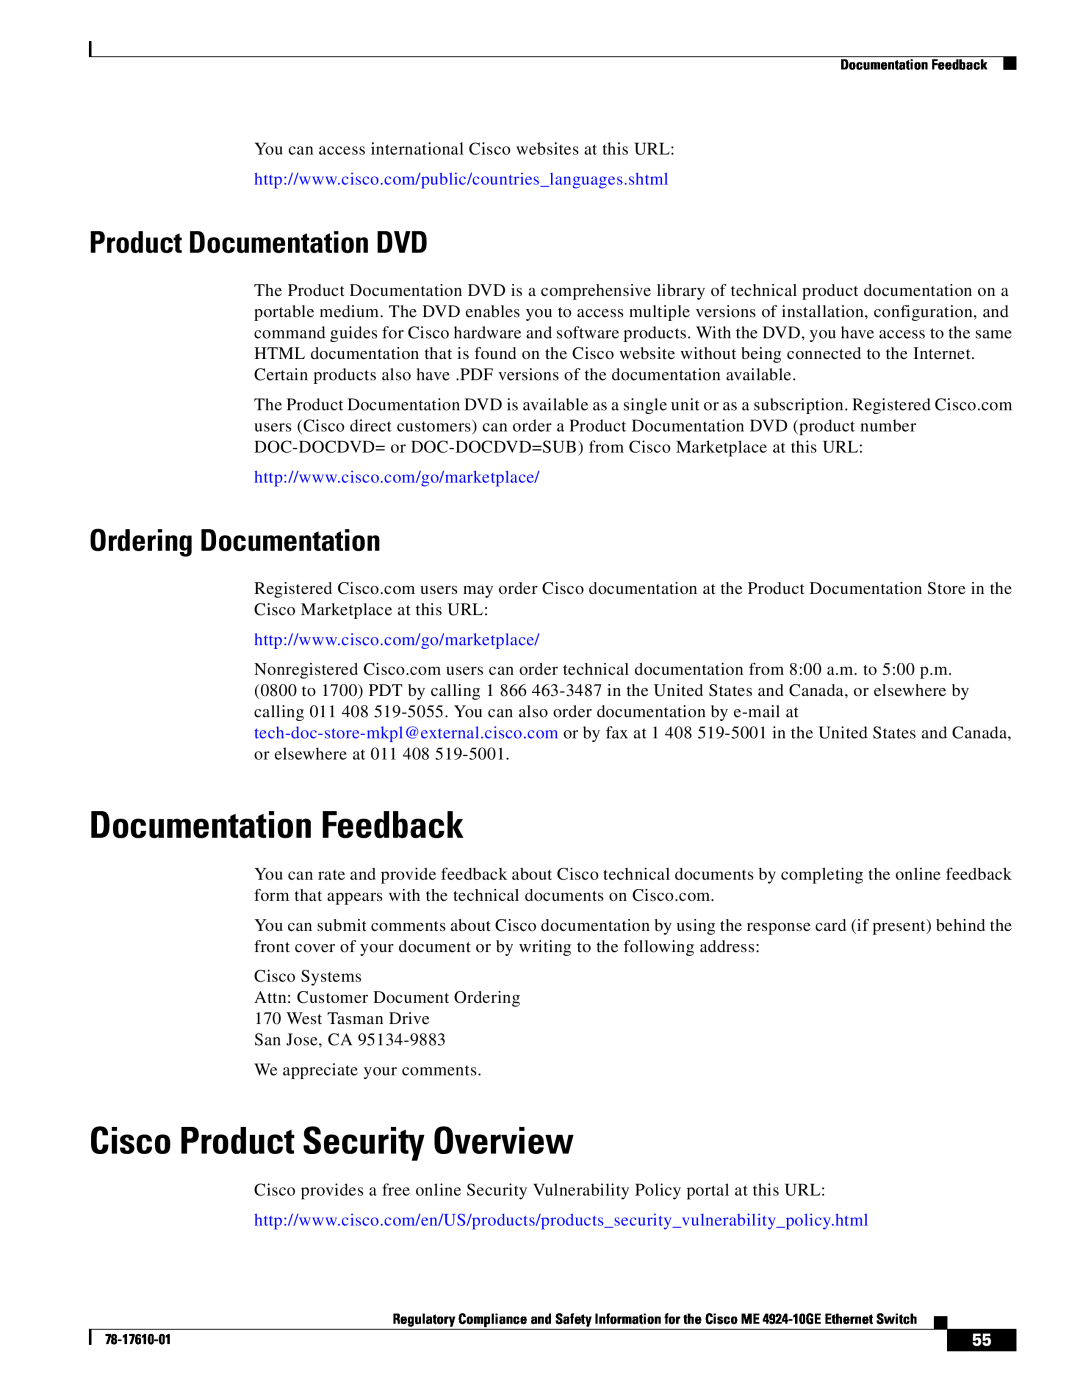 Cisco Systems ME 4924-10GE Documentation Feedback, Cisco Product Security Overview, Product Documentation DVD 